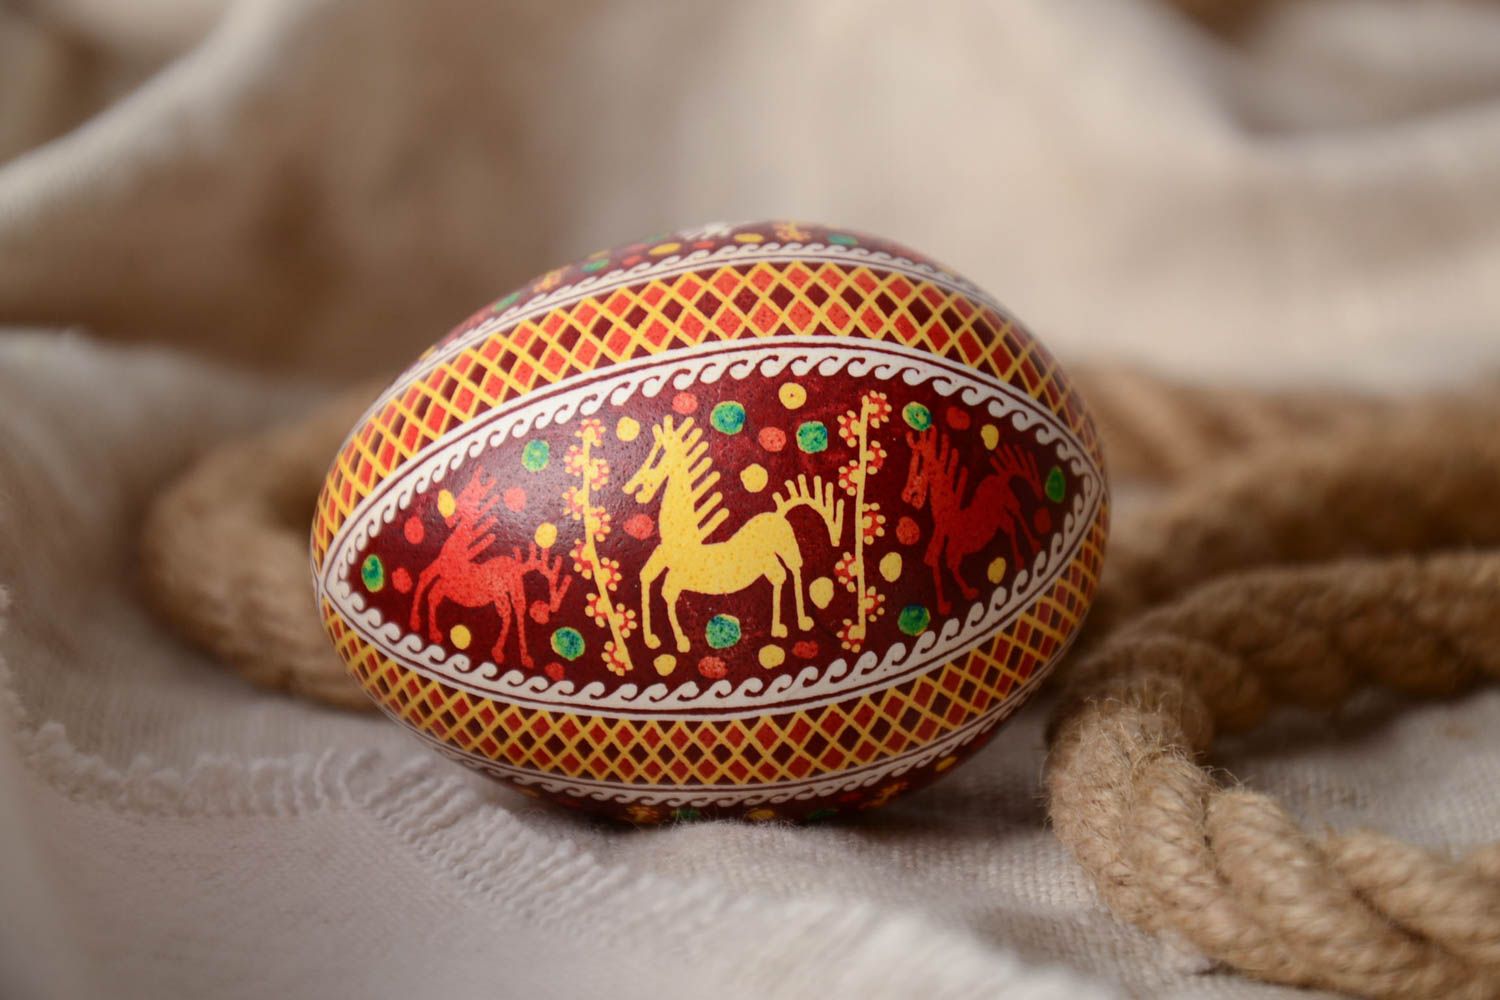 Homemade designer painted Easter egg with horse pattern created using waxing technique photo 1